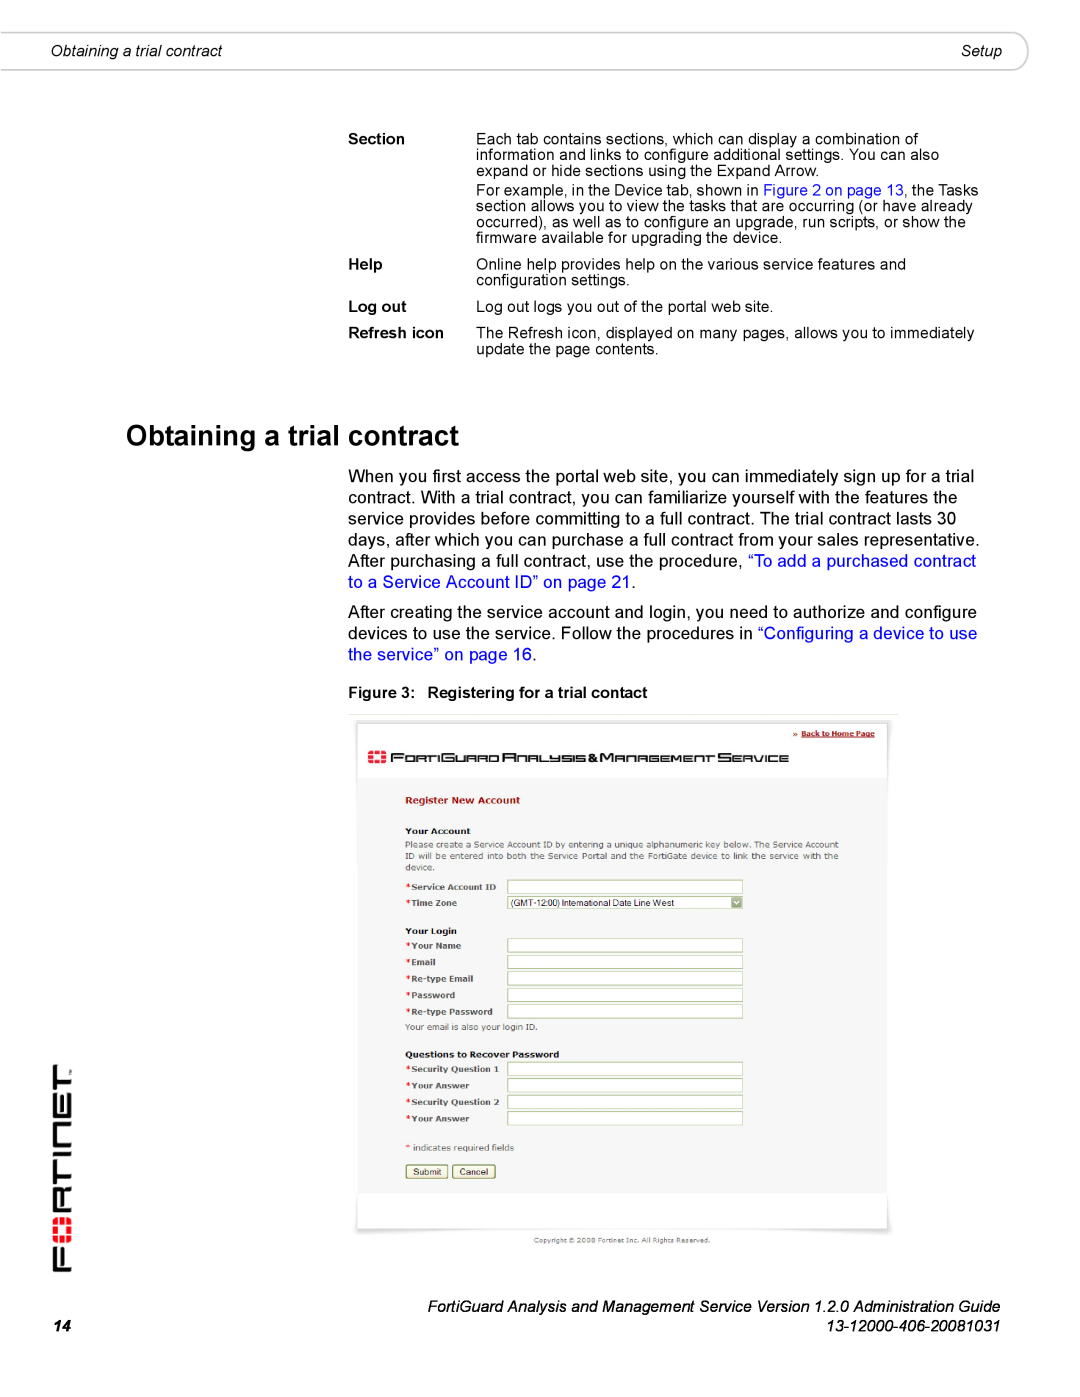 Fortinet 1.2.0 manual Obtaining a trial contract, Section, Help, Log out, Refresh icon, Registering for a trial contact 